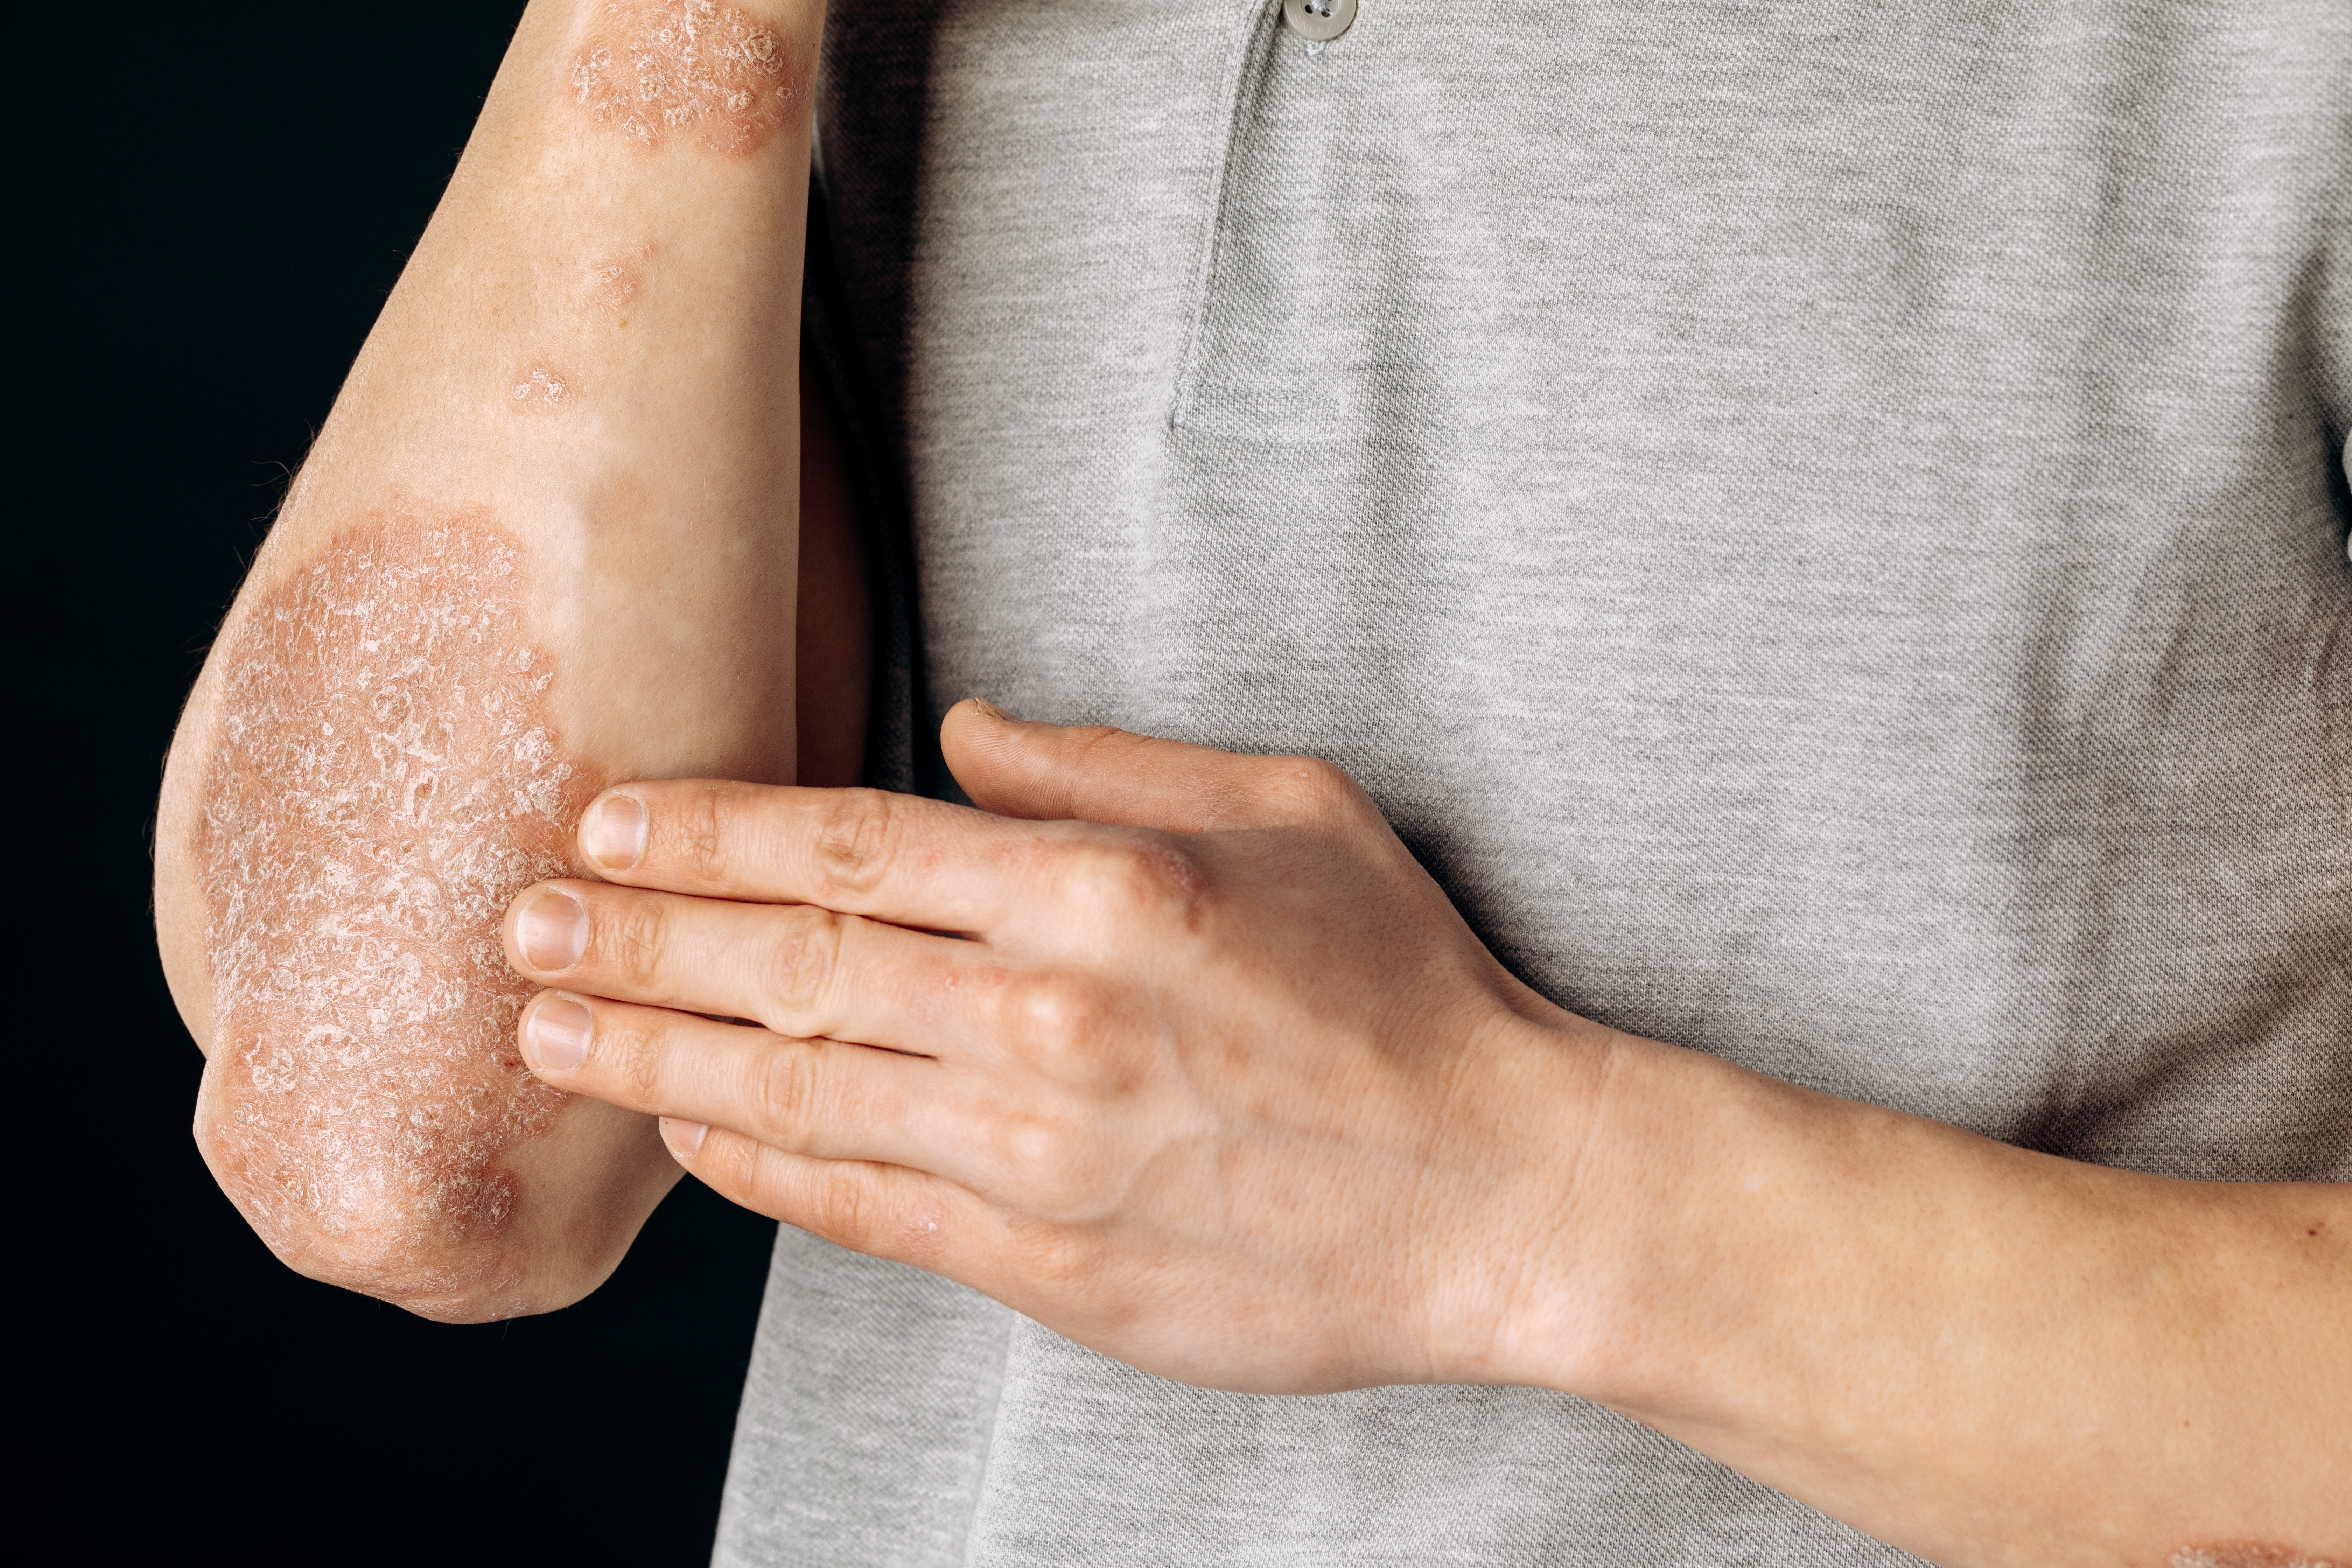 This Company Is Racing Toward Providing Comfort And Safety To Millions Of Psoriasis Sufferers